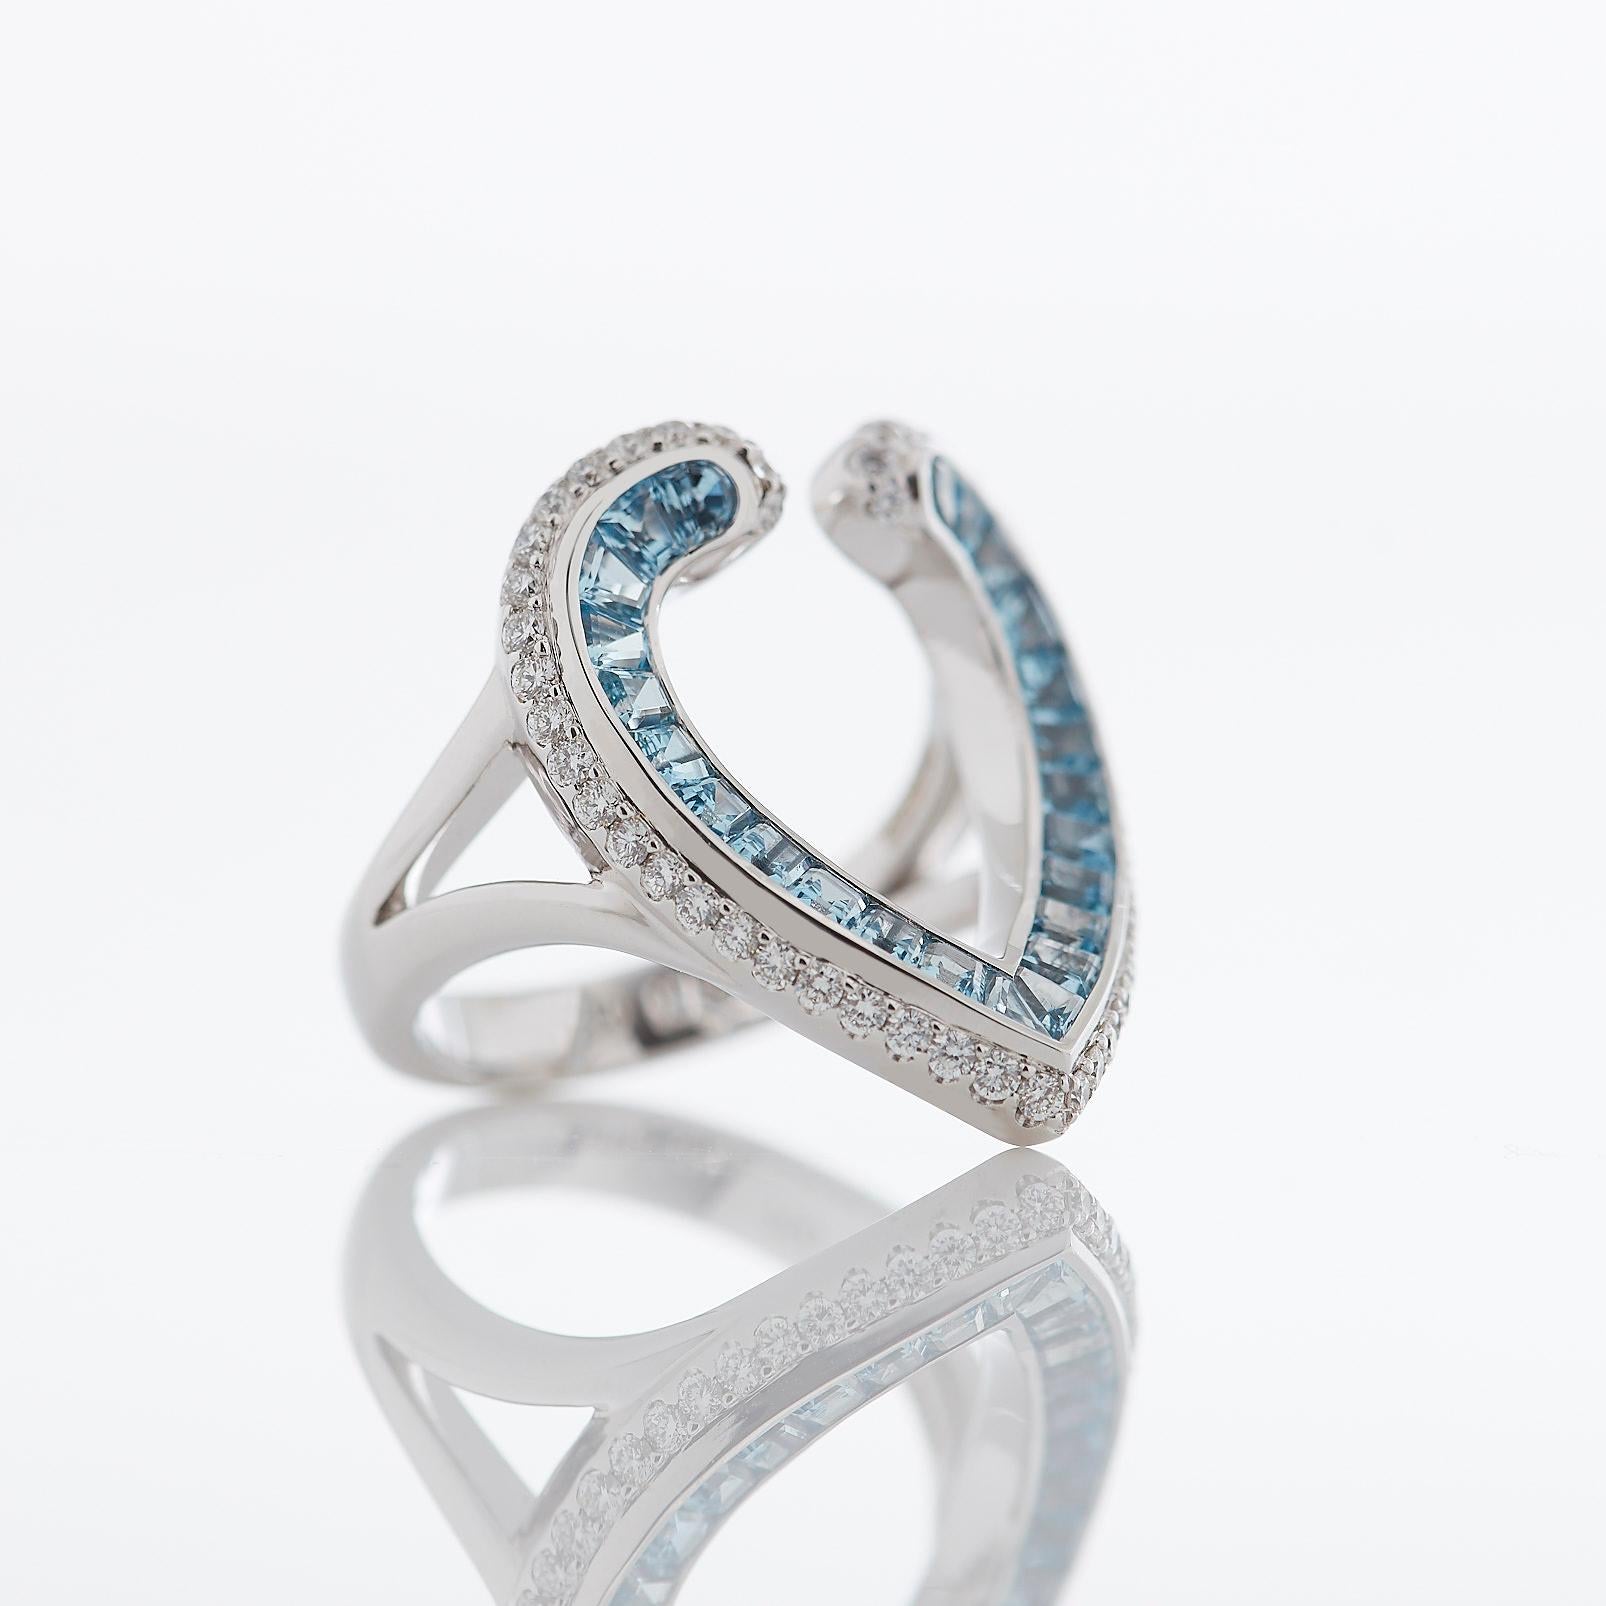 A House of Garrard 18 karat white gold ring from the 'Aloria' collection, set with round white diamonds and calibre cut aquamarines. 

50 round white diamonds weighing: 0.53cts 
24 calibre cut aquamarines weighing: 1.10cts 
Size 54

Please note